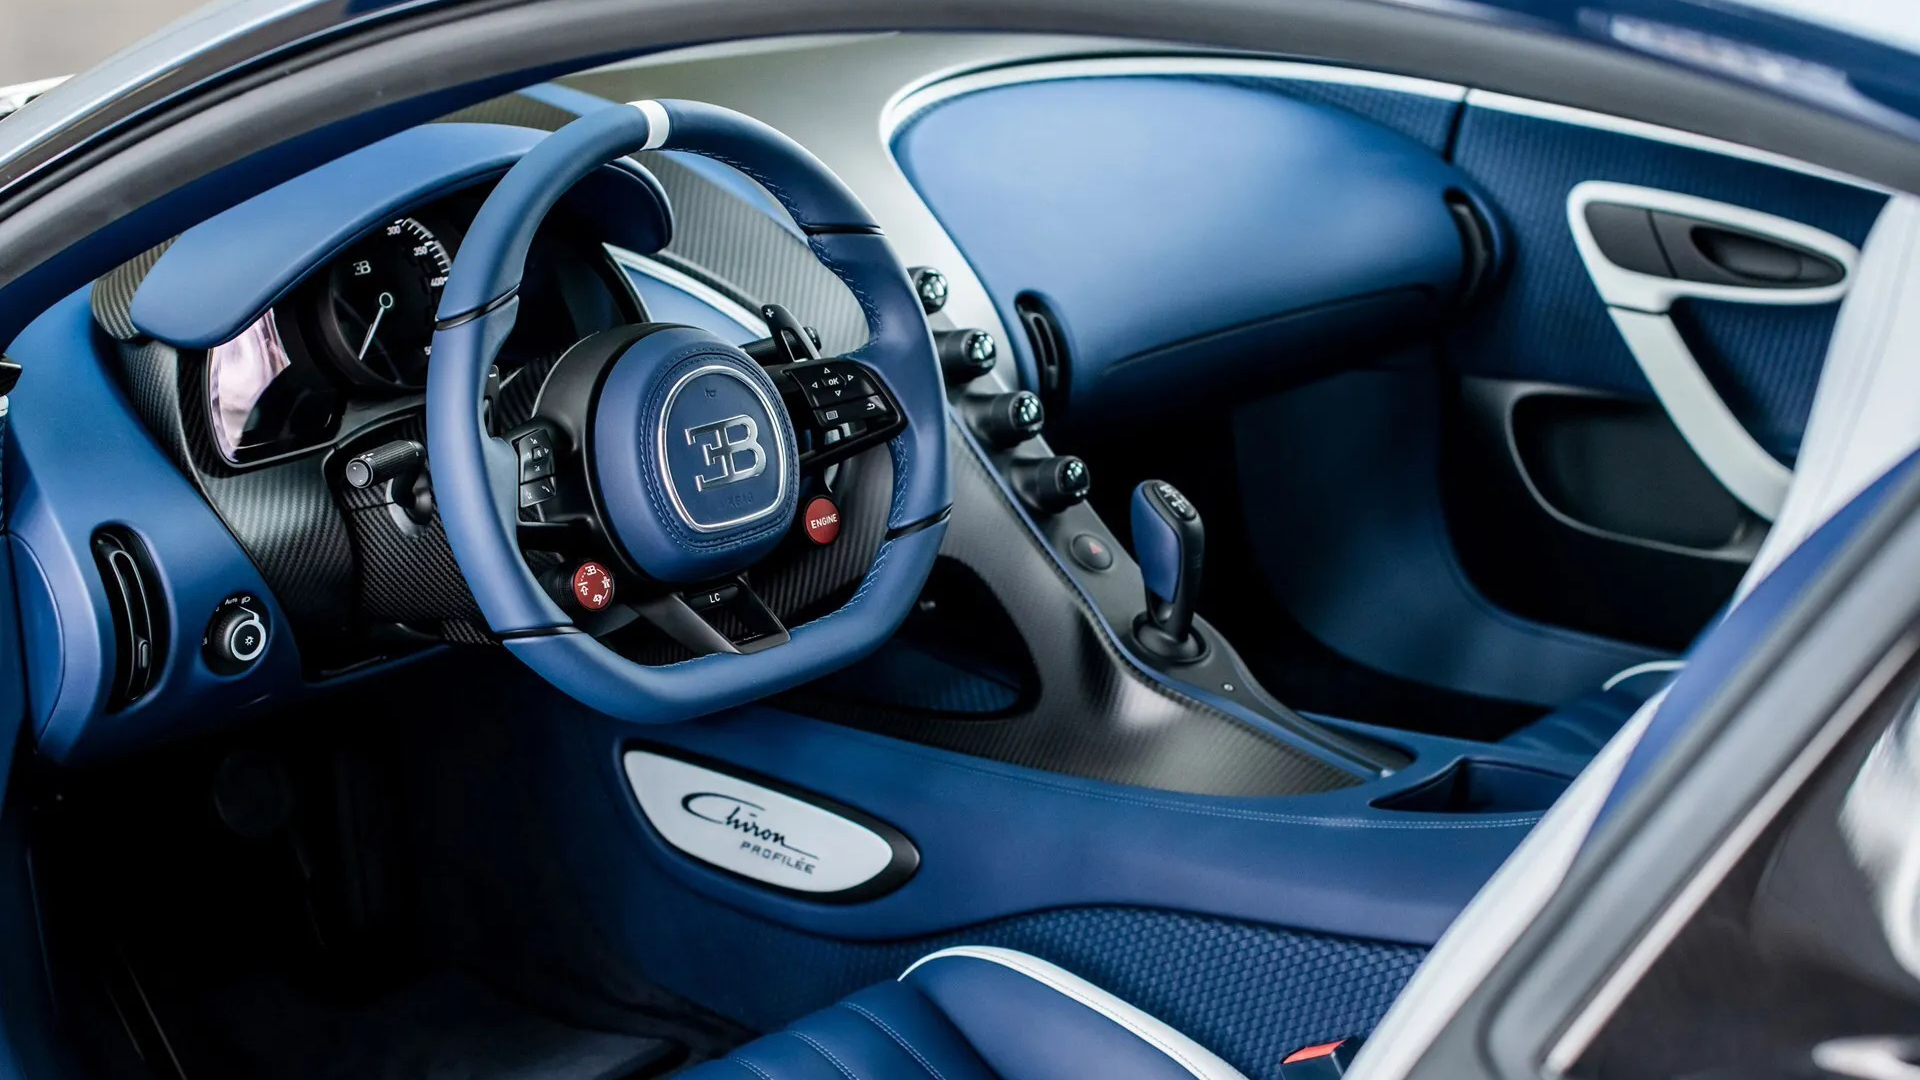 The interior has woven leather, a material that has never been used in Bugatti's Chirons before.